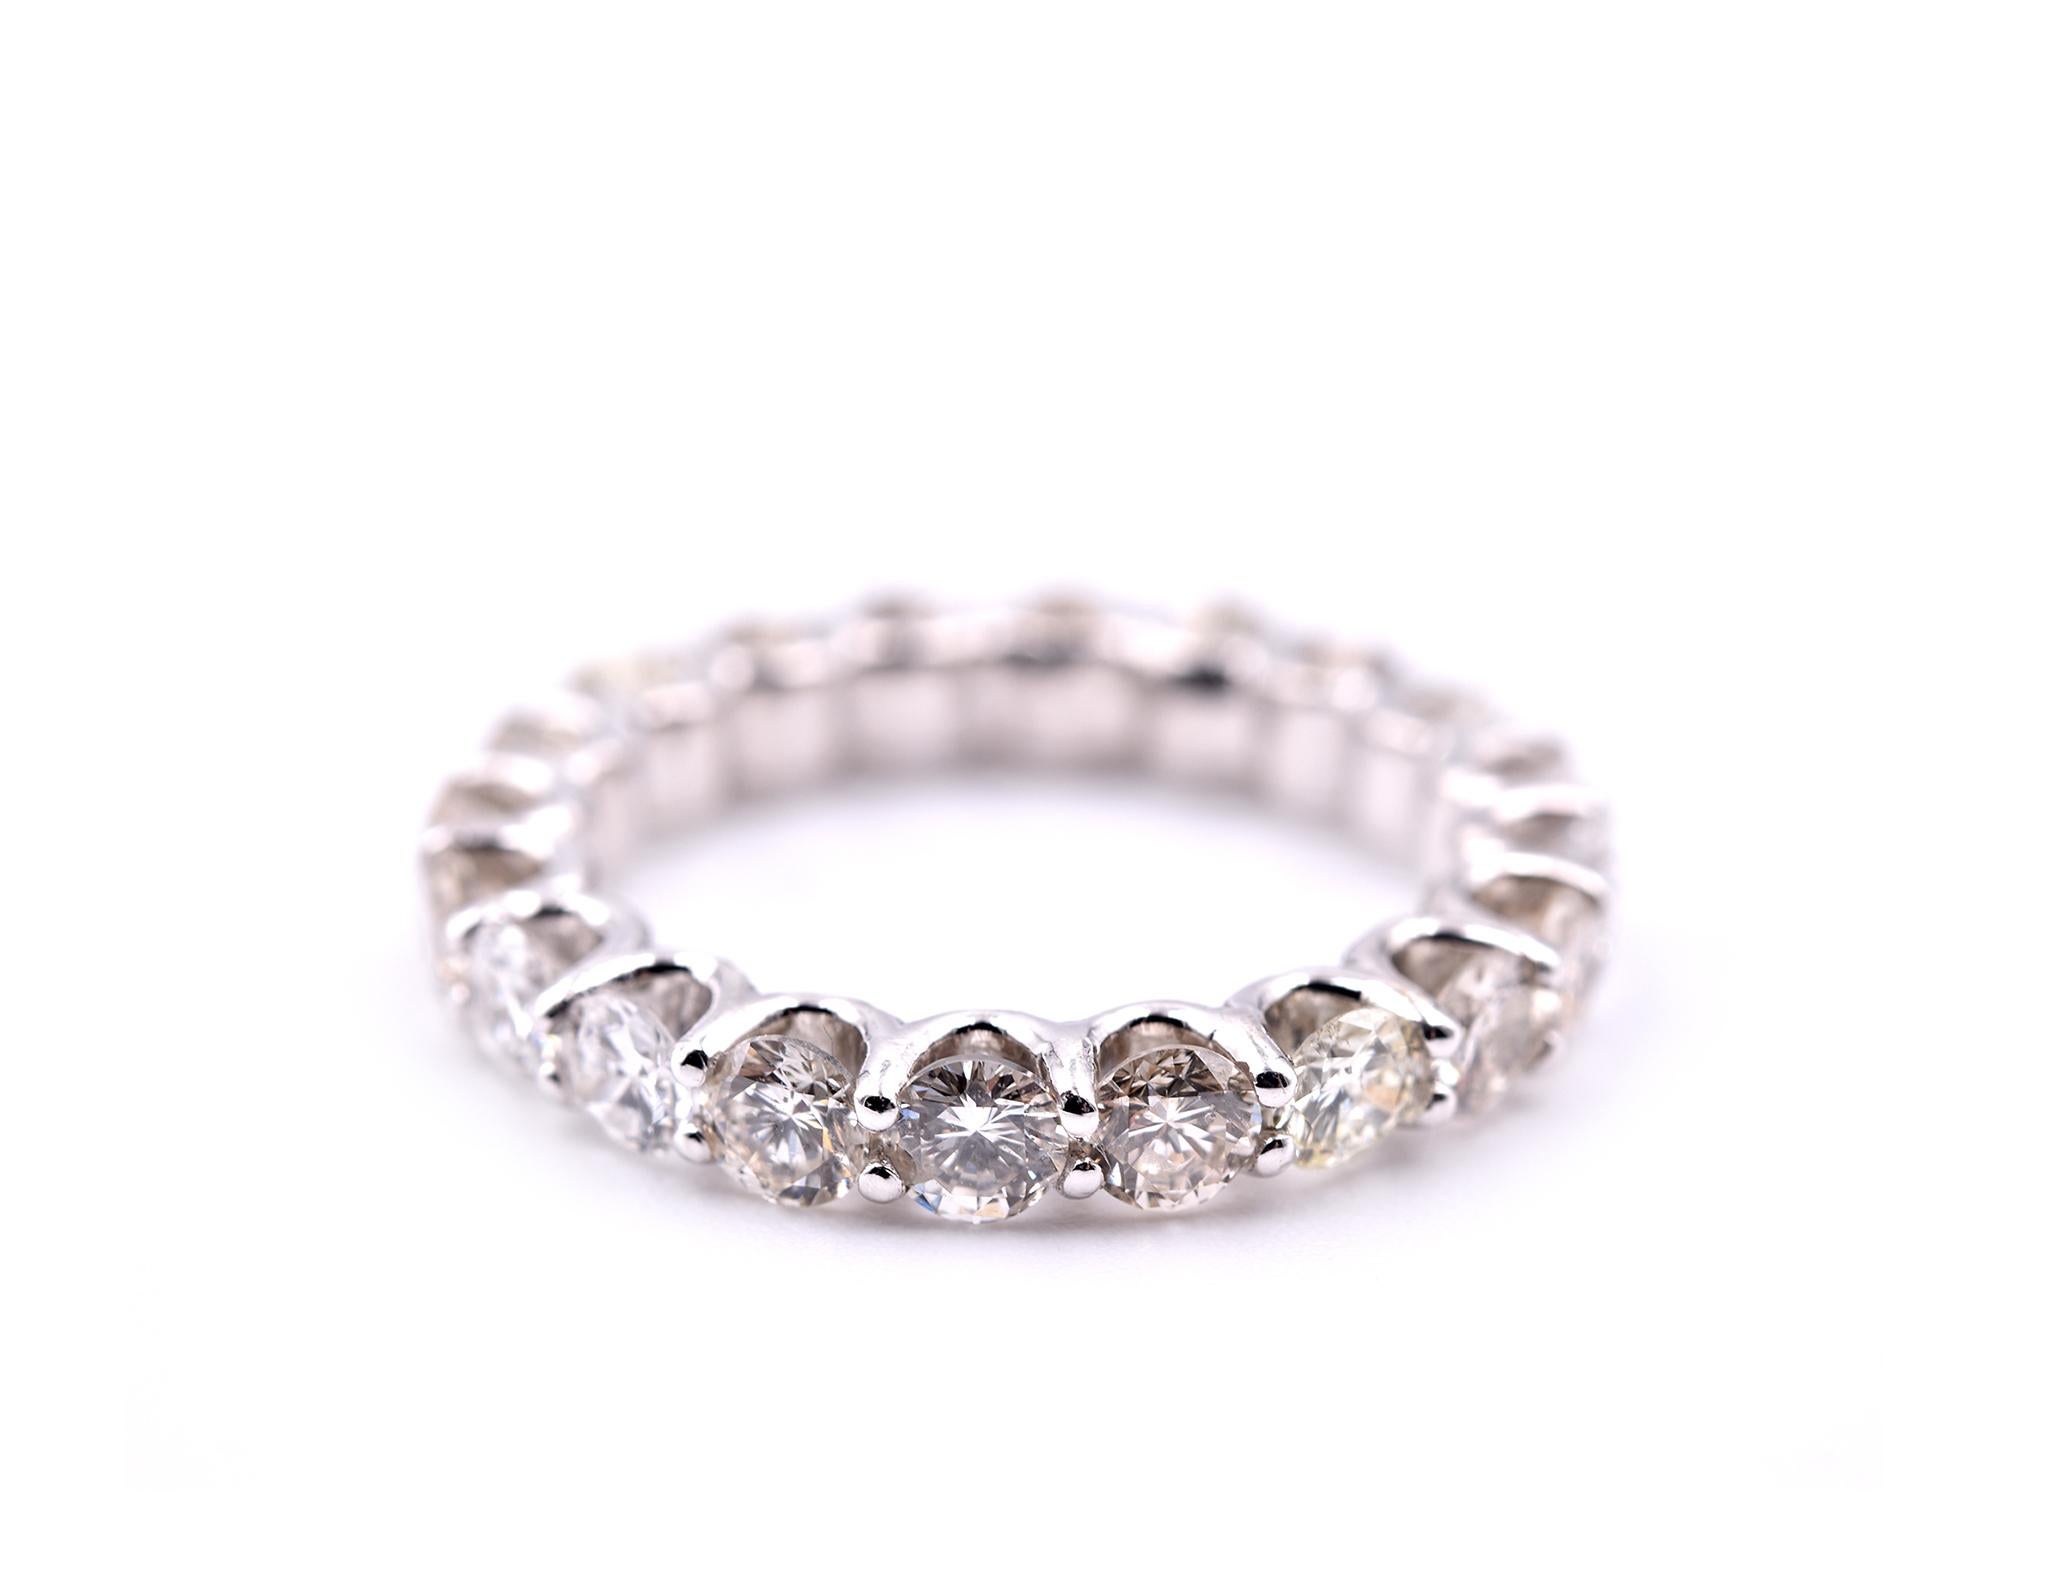 Designer: custom design
Material: 14k white gold
Diamonds: 20 round brilliant cut= 2.70cttw
Color: H
Clarity: SI1
Ring size: 6 
Dimensions: ring is approximately 3.40mm wide
Weight: 3.51 grams 
